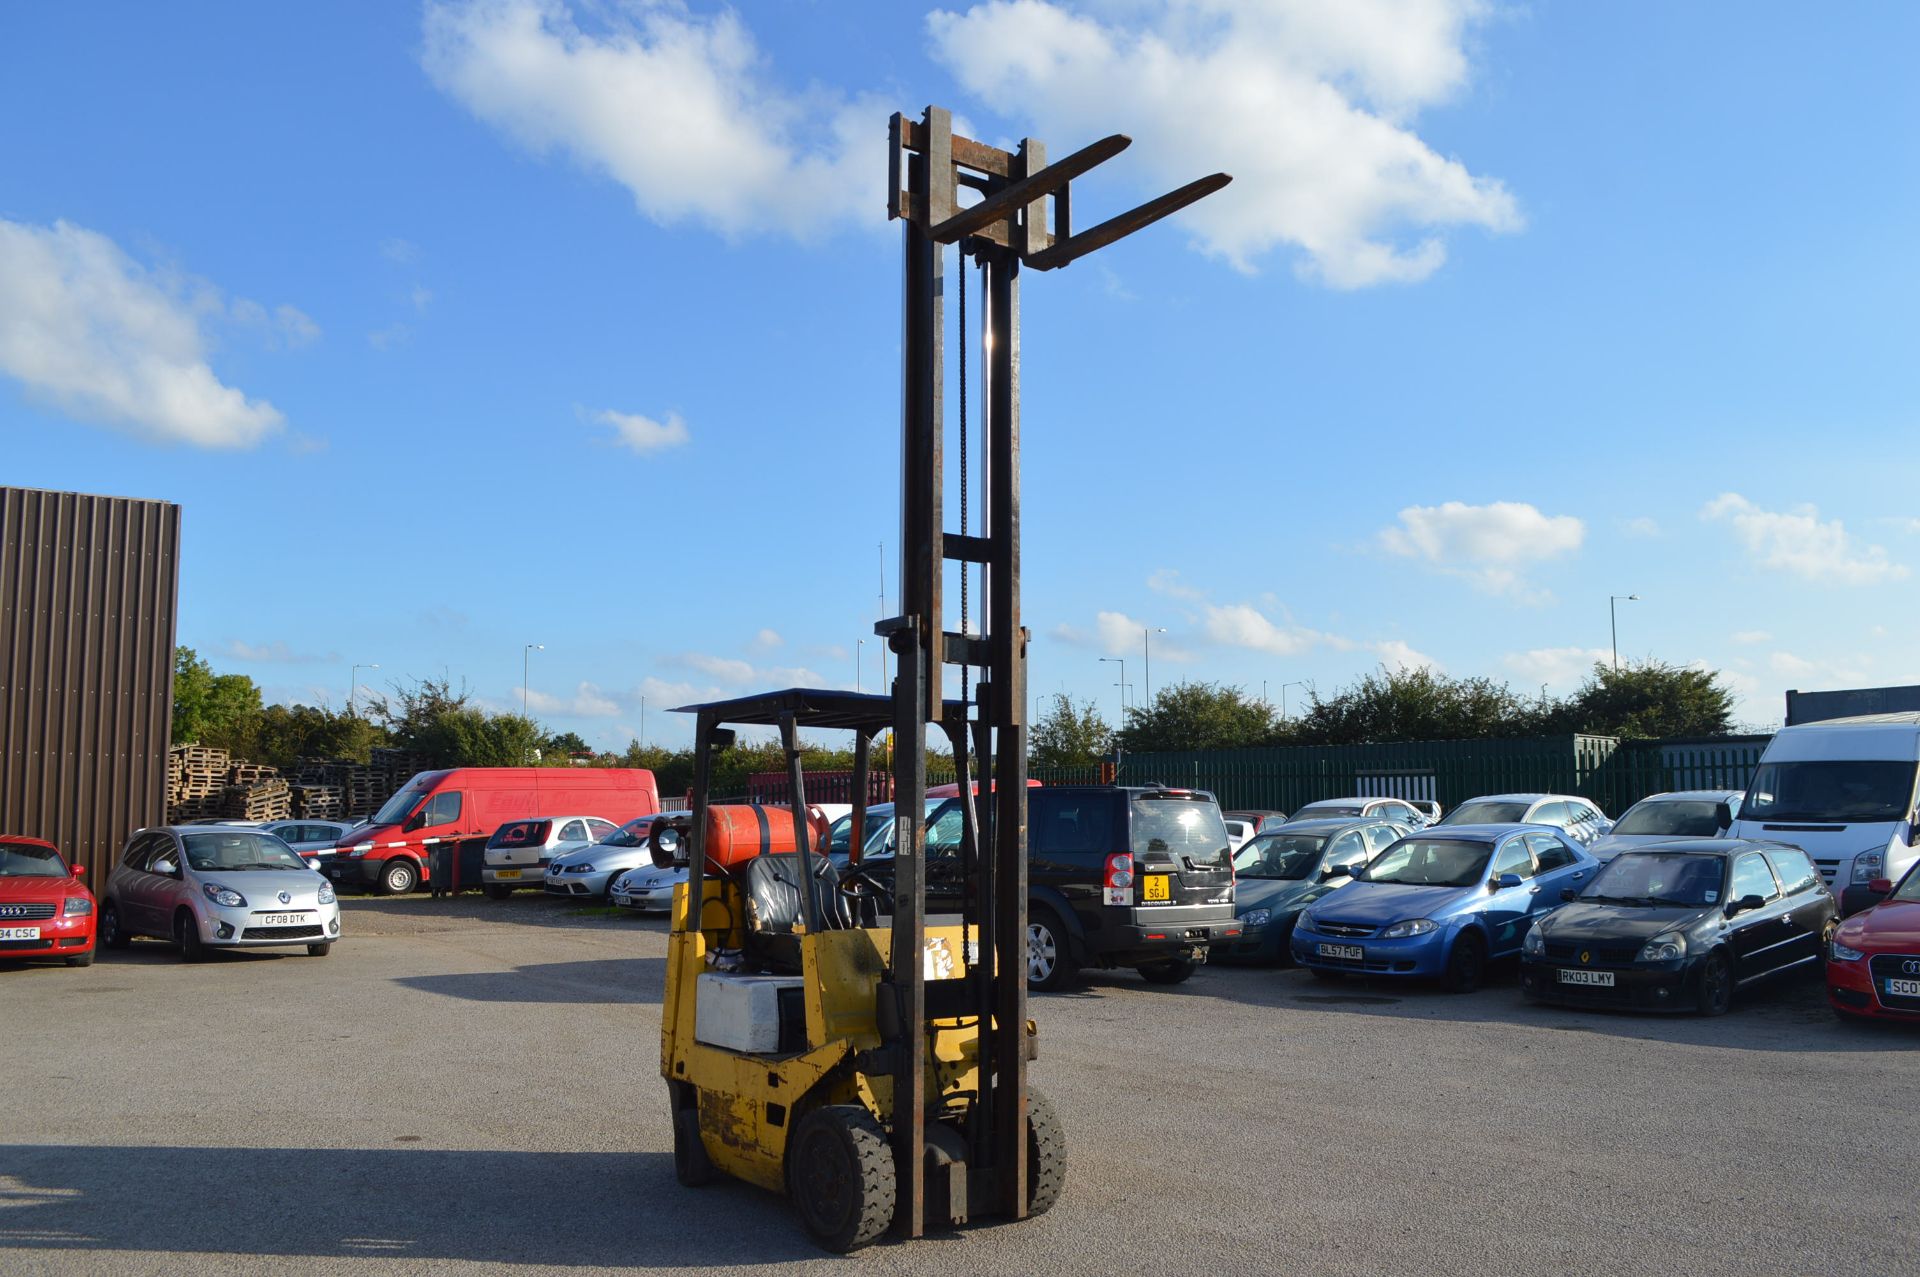 TCM 1.75T LPG FORKLIFT - GAS BOTTLE NOT INCLUDED   BRAKES GOOD RATED CAPACITY: 1600KG MAX FORK - Image 11 of 14